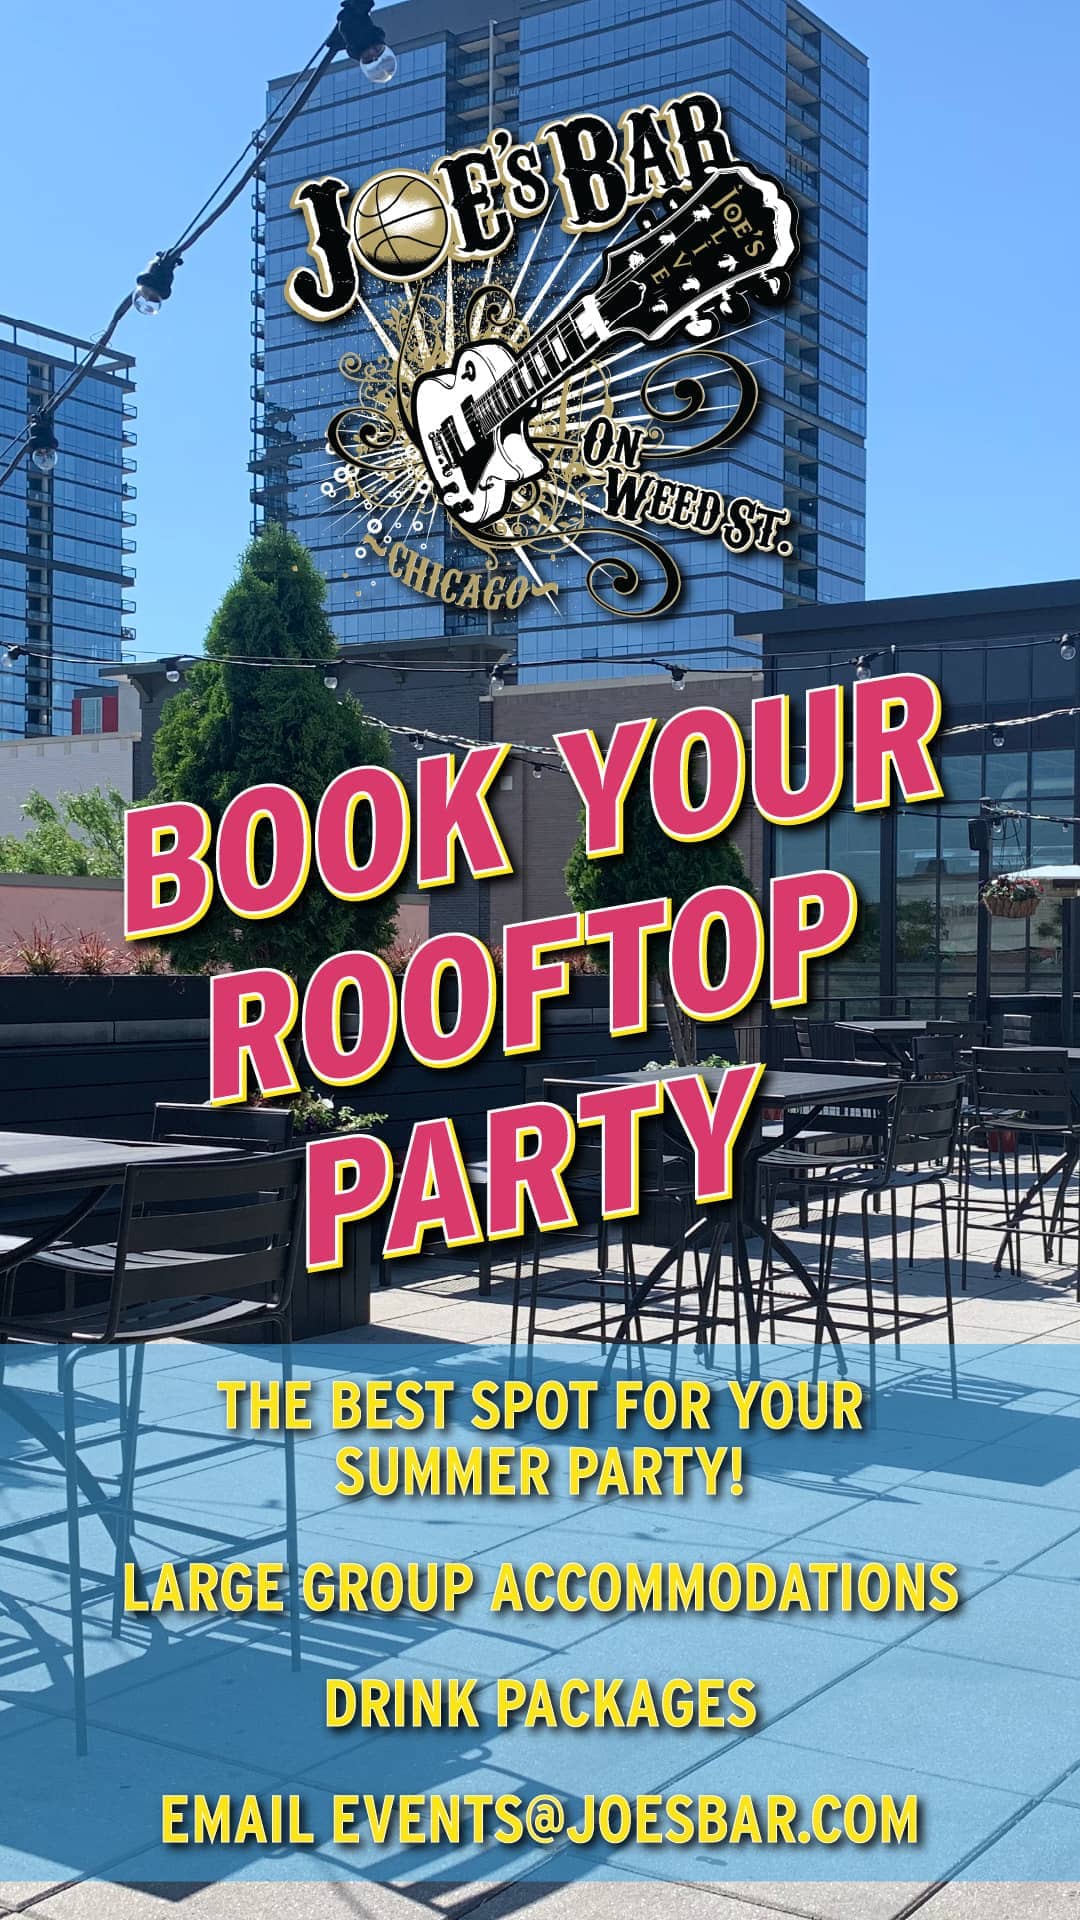 Poster To Book Your Rooftop Party at Joe's on Weed St.